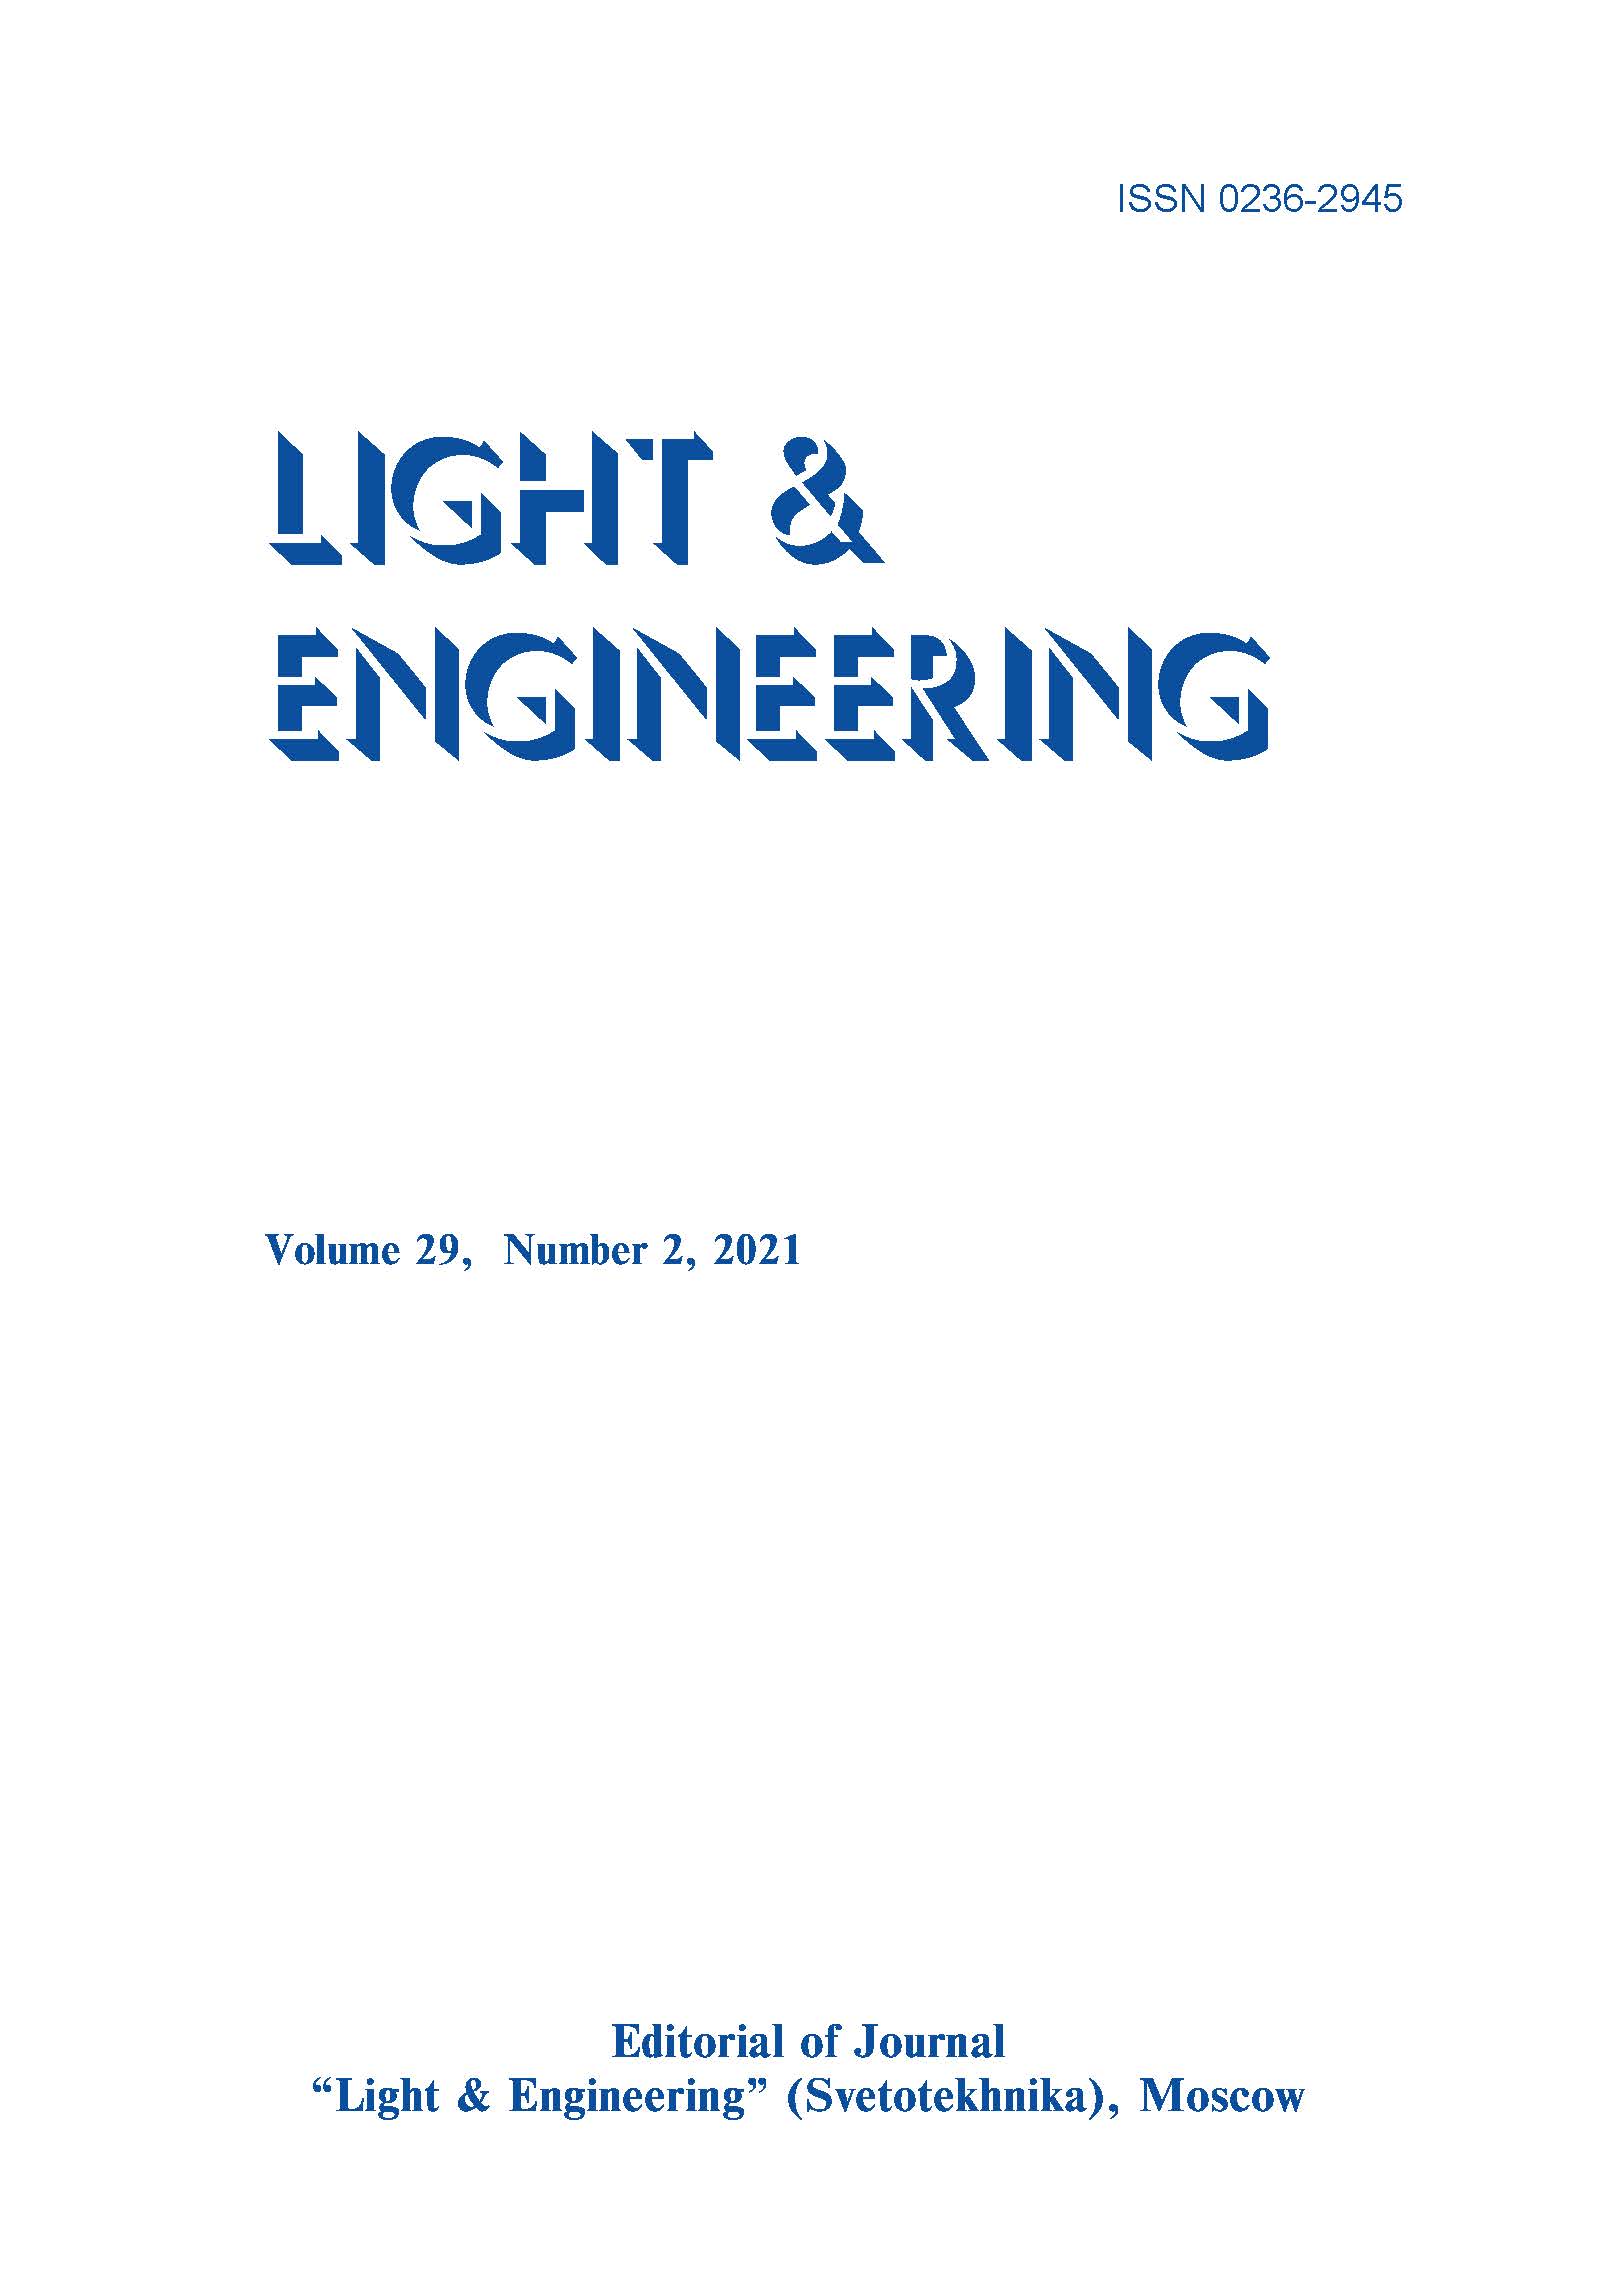 Intracanopy Lighting in Phytocenoses and Photobiological Efficiency of Radiation in Photoculture Conditions L&E, Vol. 29, No. 2, 2021